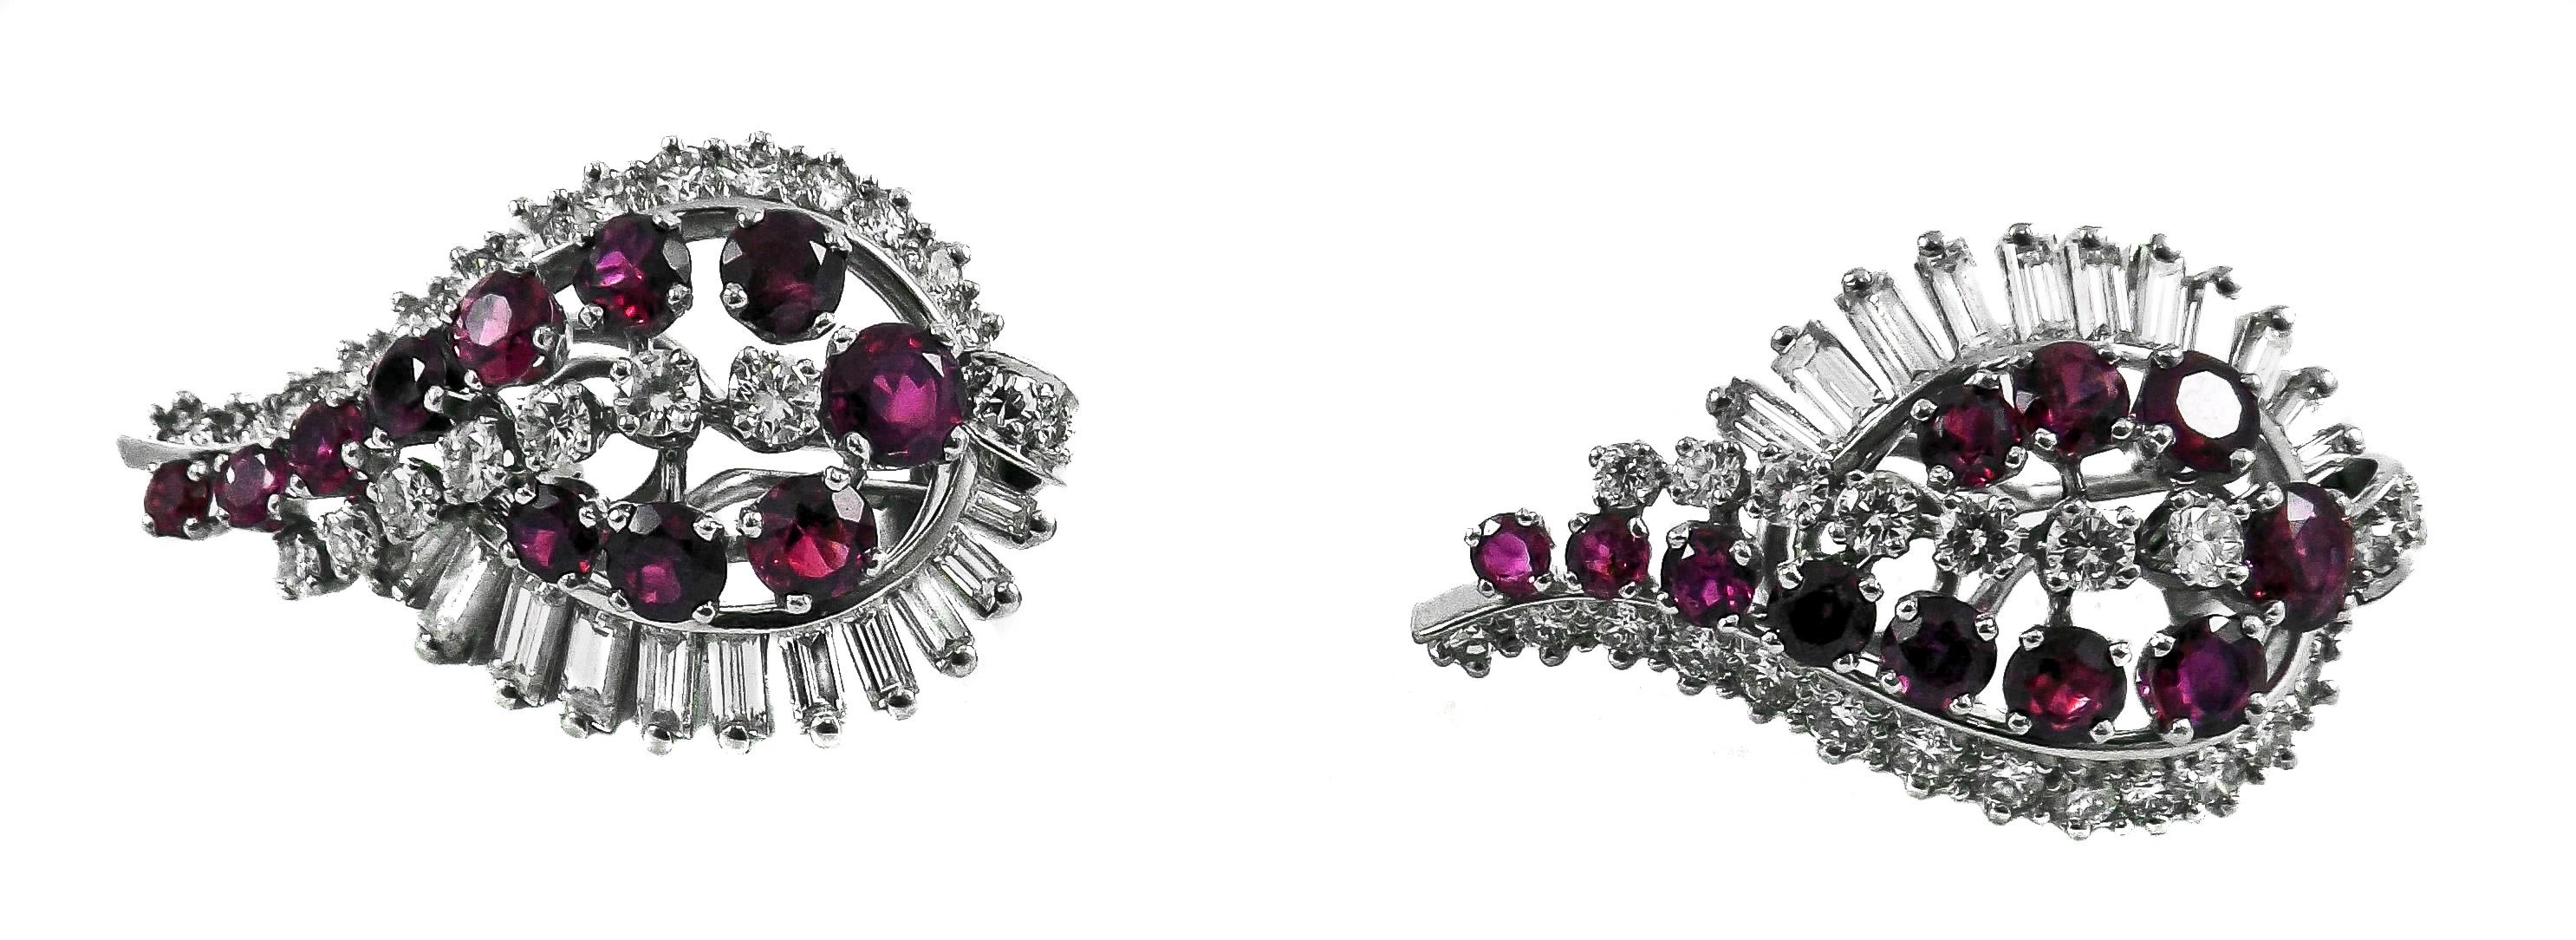 Sexy diamond and Burma ruby ear clips by Gubelin Switzerland, superbly hand crafted out of platinum with 18 karat white gold post and omega clip back. World renowned for its choice of quality gemstones and diamonds, Gubelin has chosen exceptionally